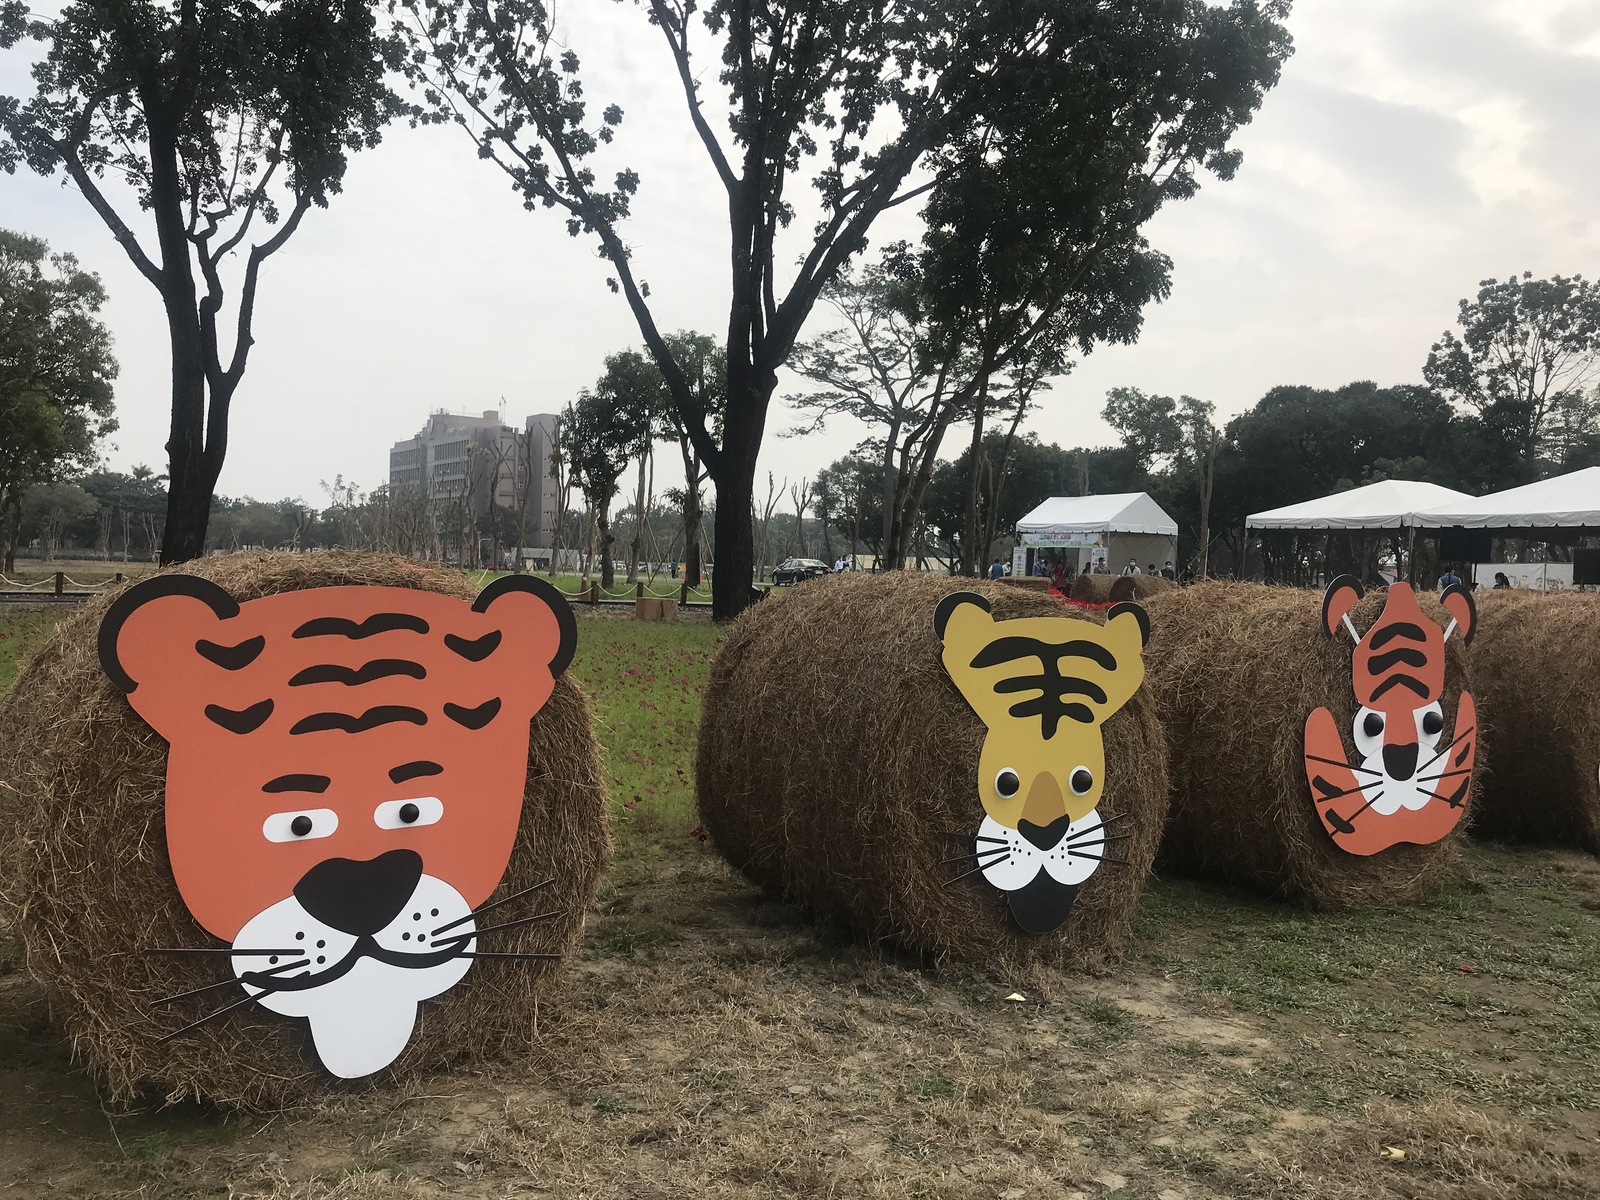 NSYSU, Kaohsiung City Government transform Renwu campus into recreational area for Chinese New Year